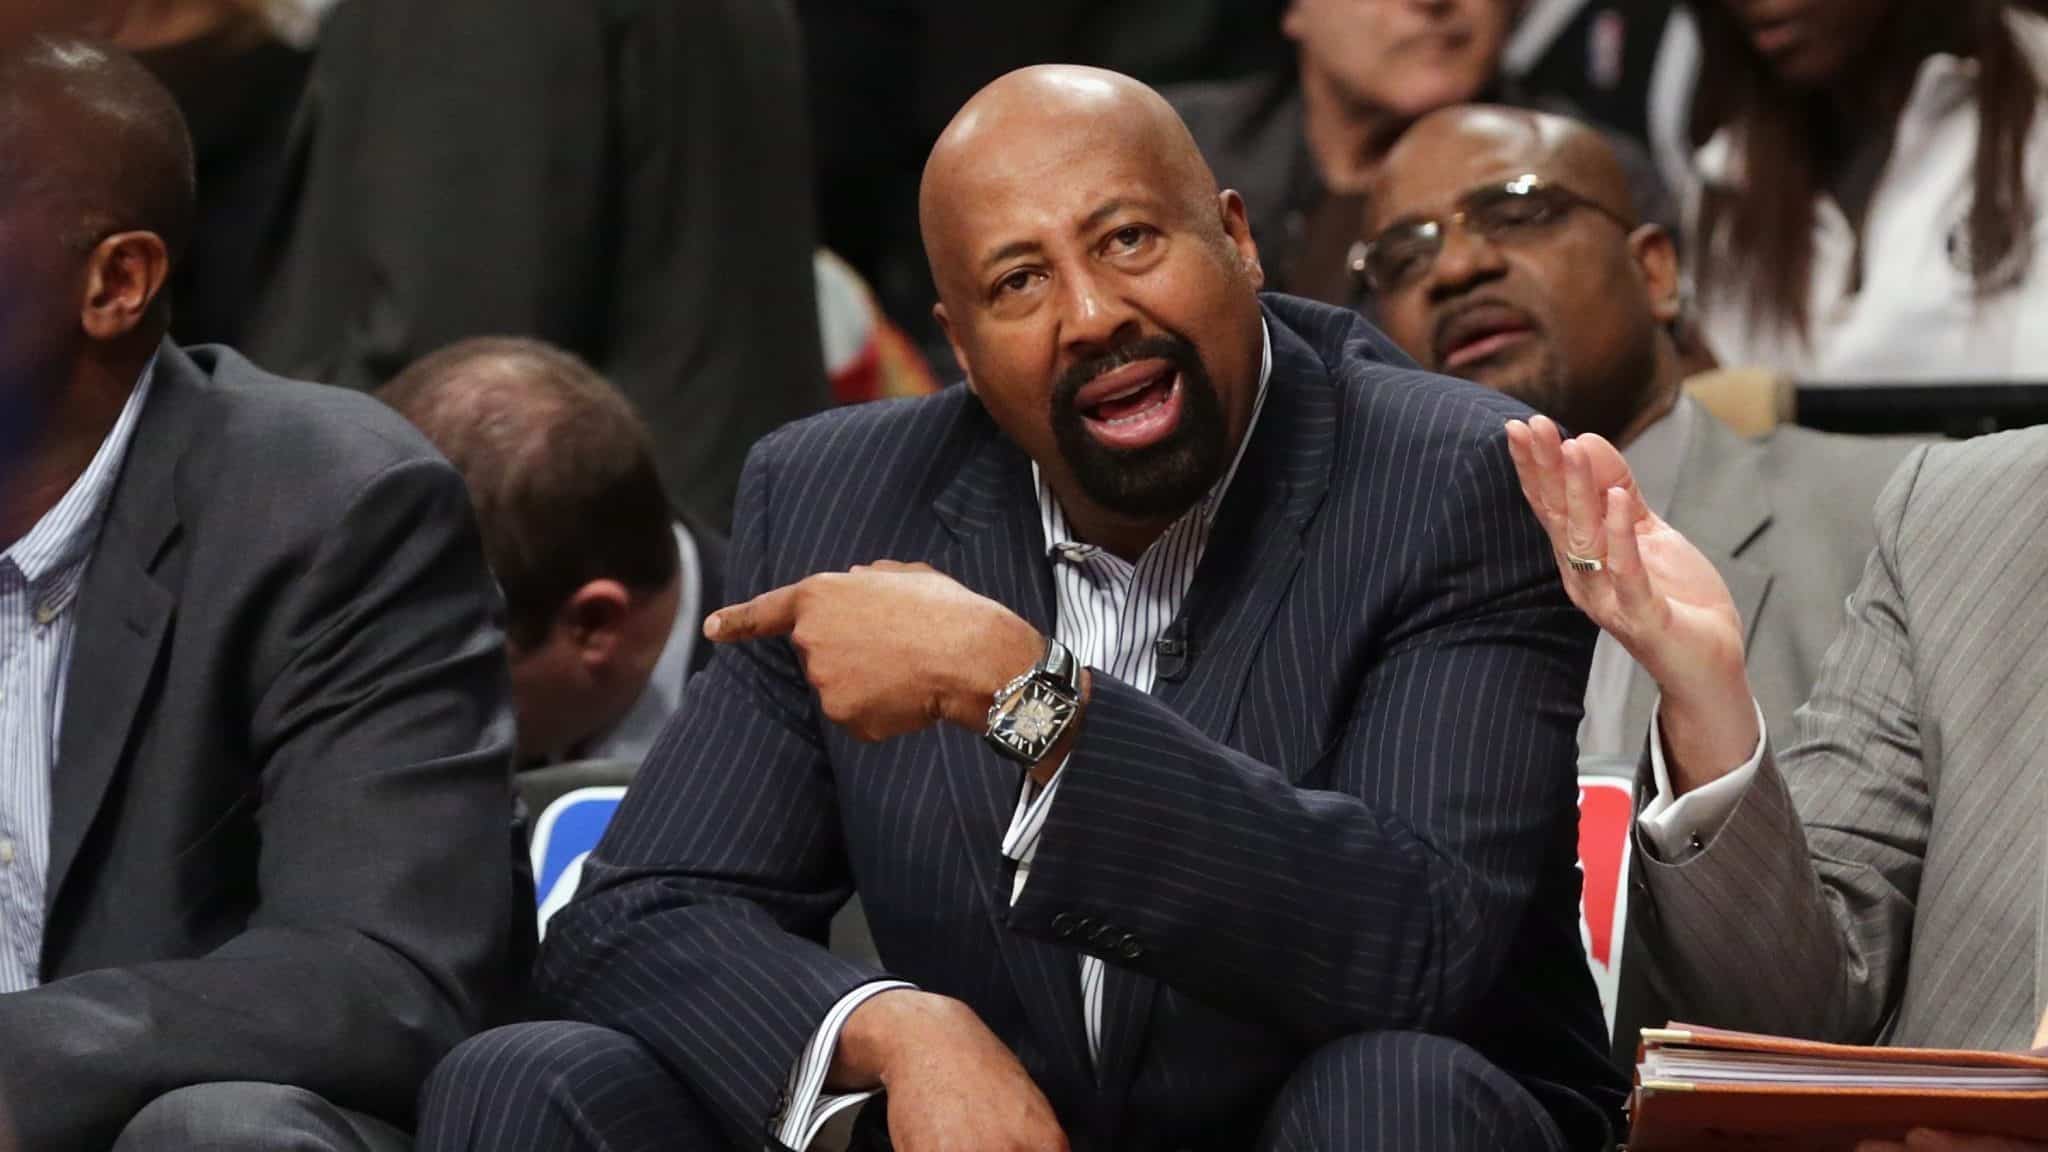 NEW YORK, NY - APRIL 15: Mike Woodson of the New York Knicks handles bench duties during the game against the Brooklyn Nets at the Barclays Center on April 15, 2014 in the Brooklyn borough of New York City. NOTE TO USER: User expressly acknowledges and agrees that, by downloading and/or using this Photograph, user is consenting to the terms and conditions of the Getty Images License Agreement.